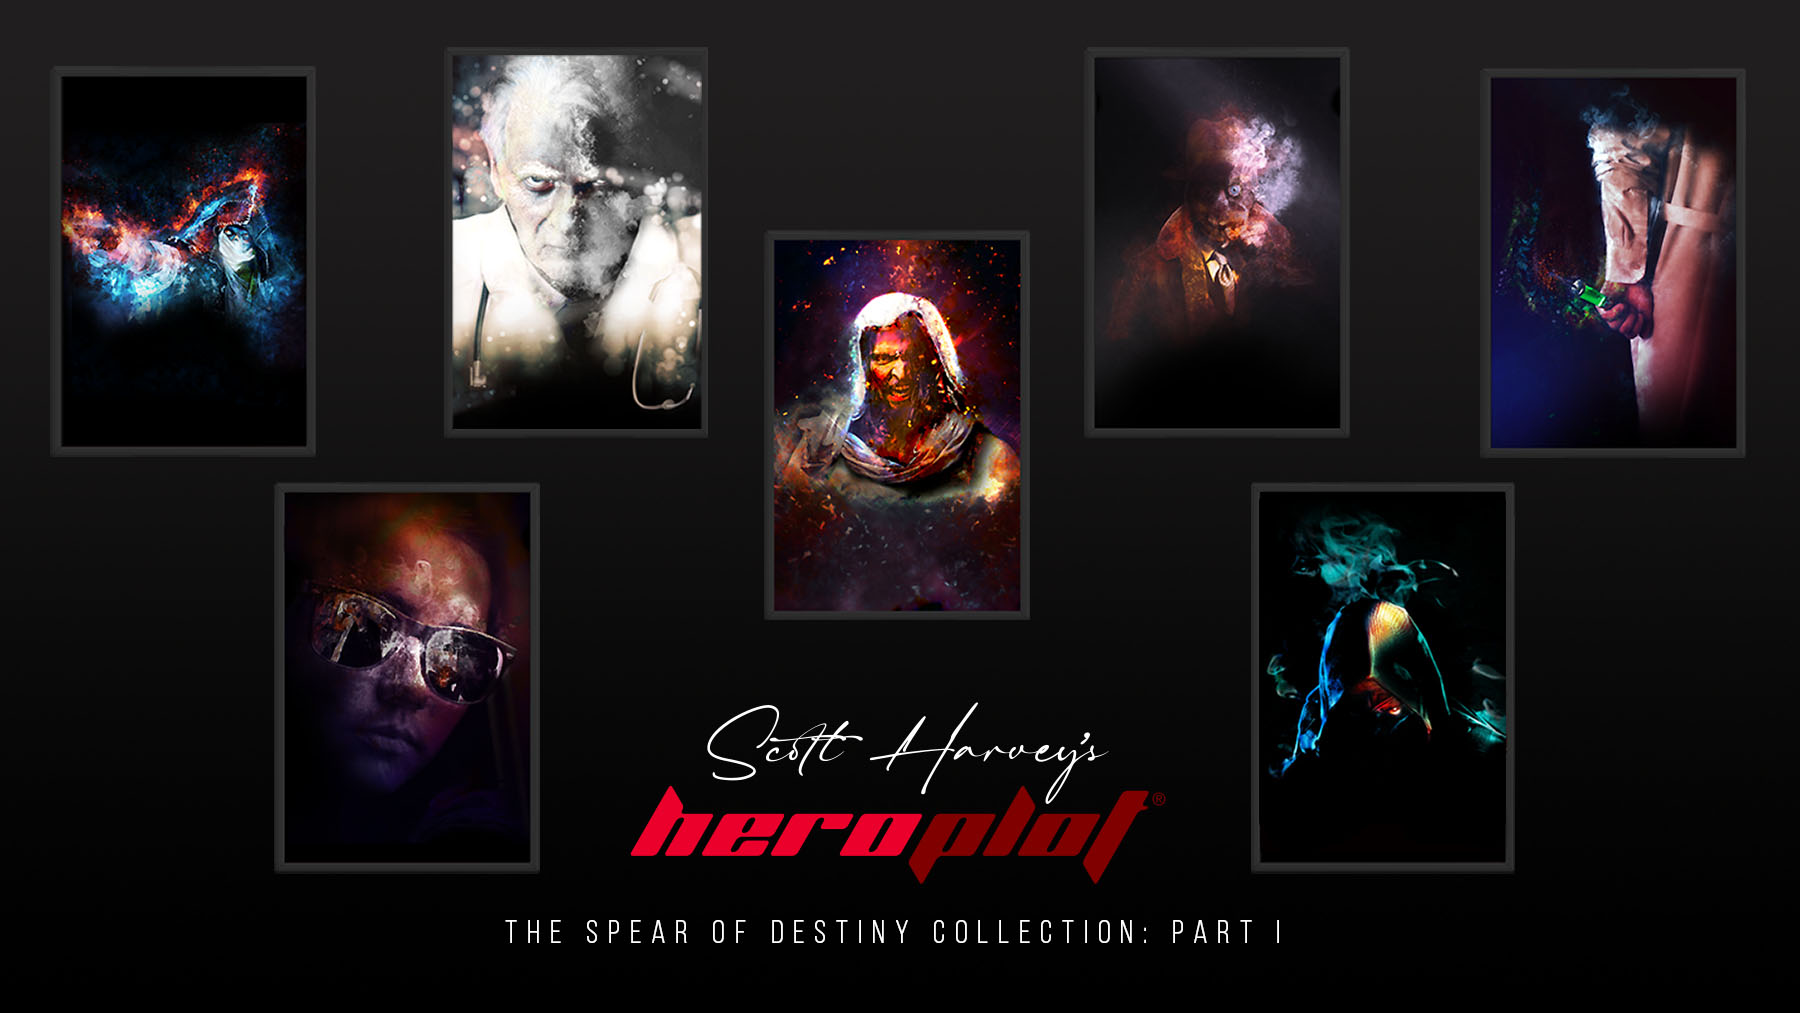 The Spear of Destiny Collection: Part I NFT artwork from HEROPLOT